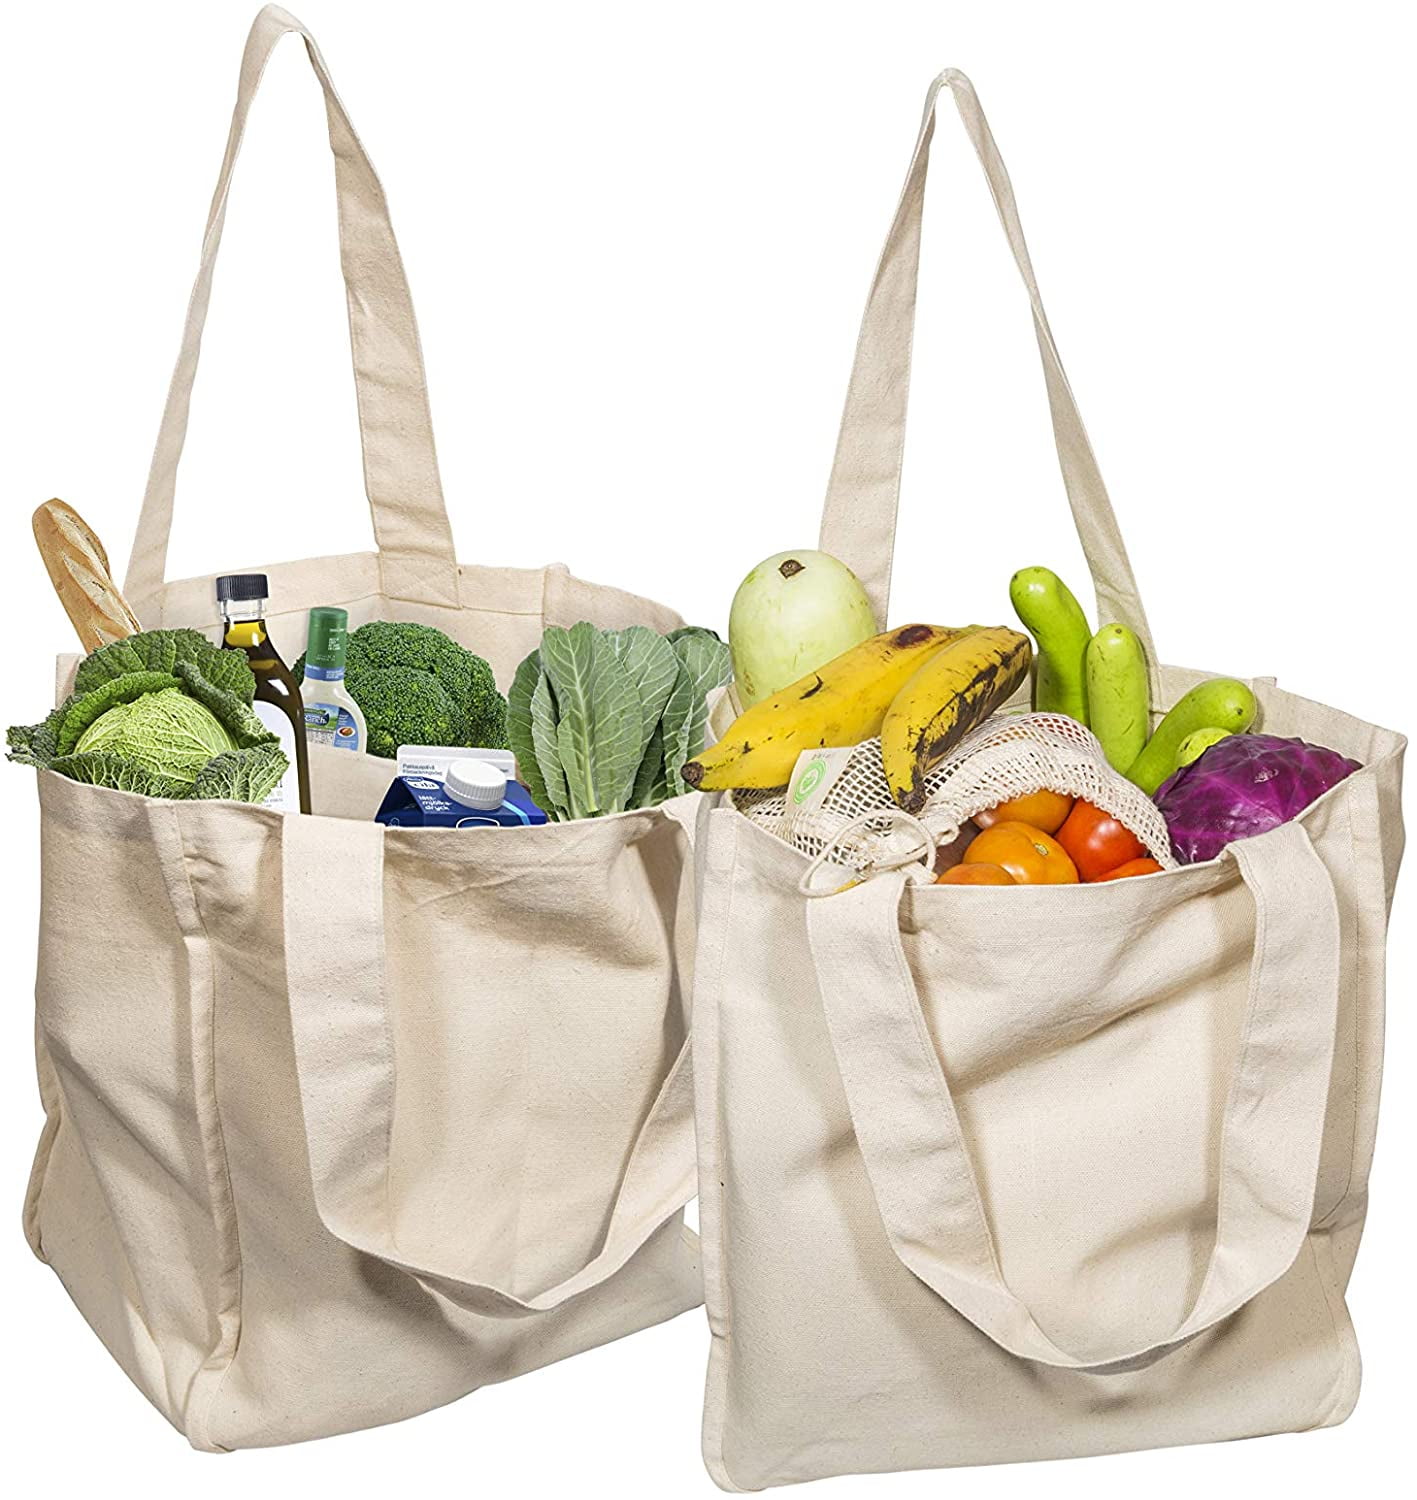 Heavy Duty 13x14.5x8 Cotton Canvas Grocery Bag With Bottle Sleeves 